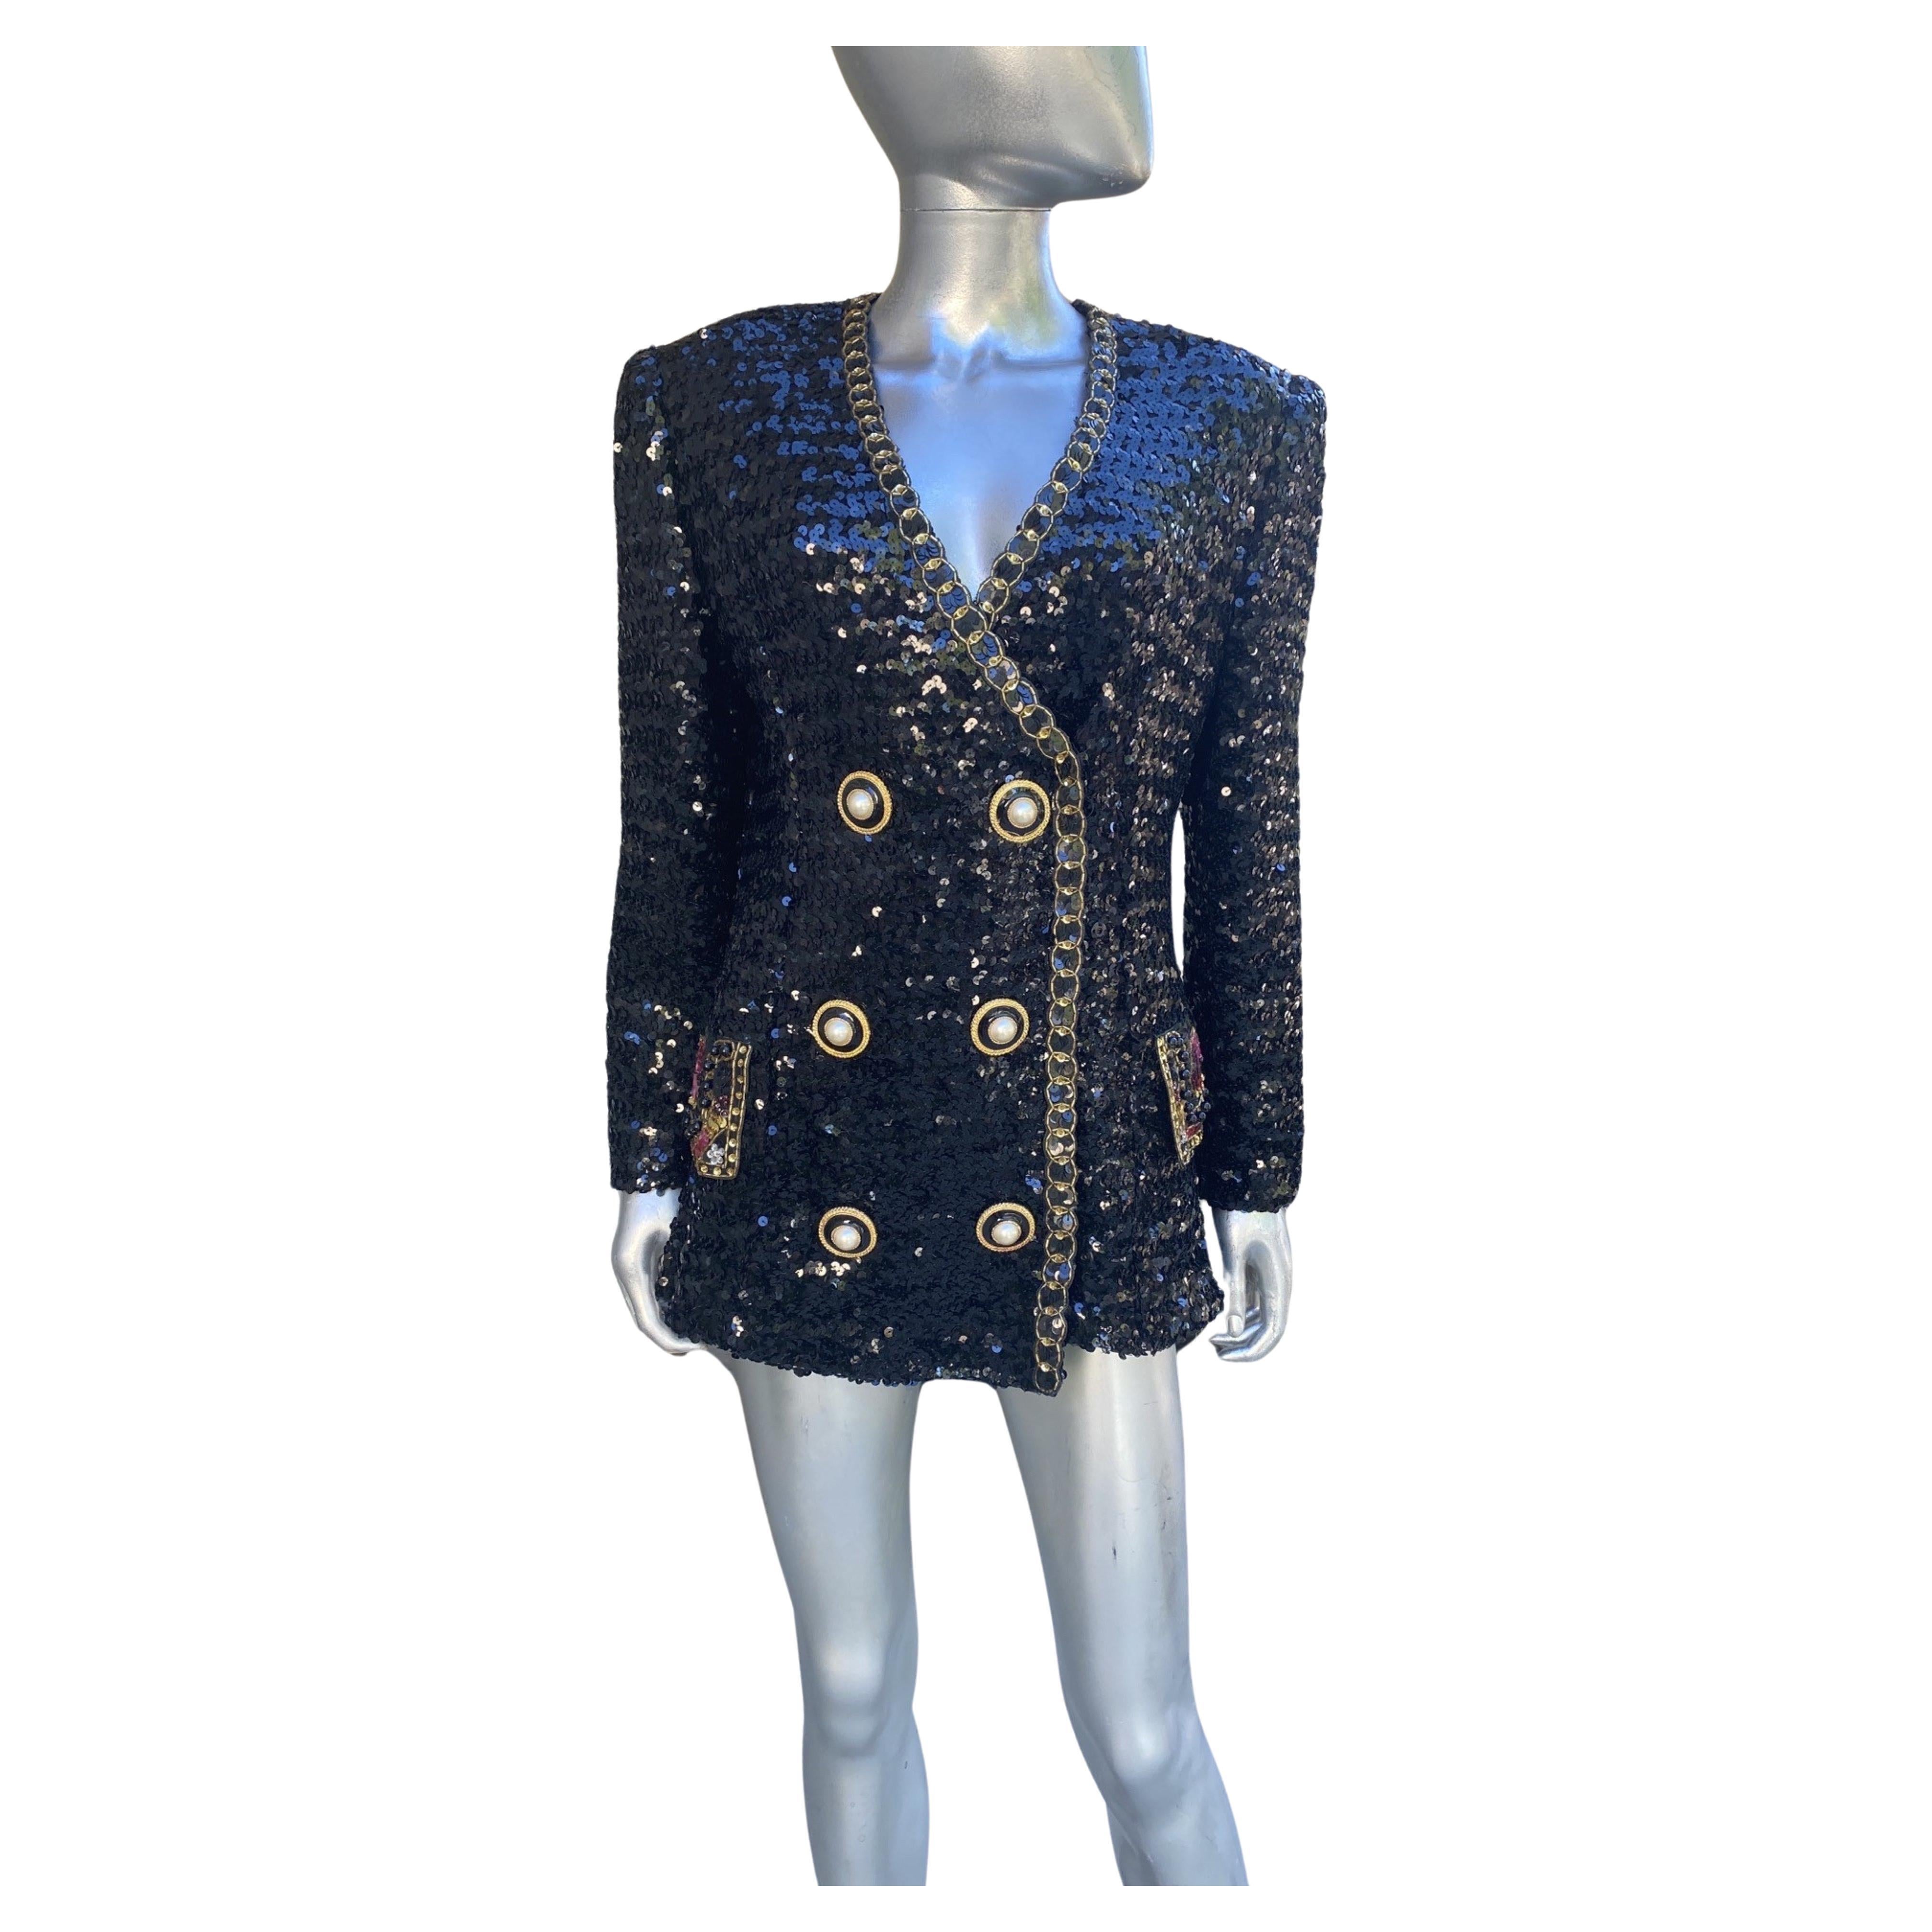 Lillie Rubin Vintage Sequin Jacket with Spectacular Trim/Buttons Size 12-14 In Good Condition For Sale In Palm Springs, CA